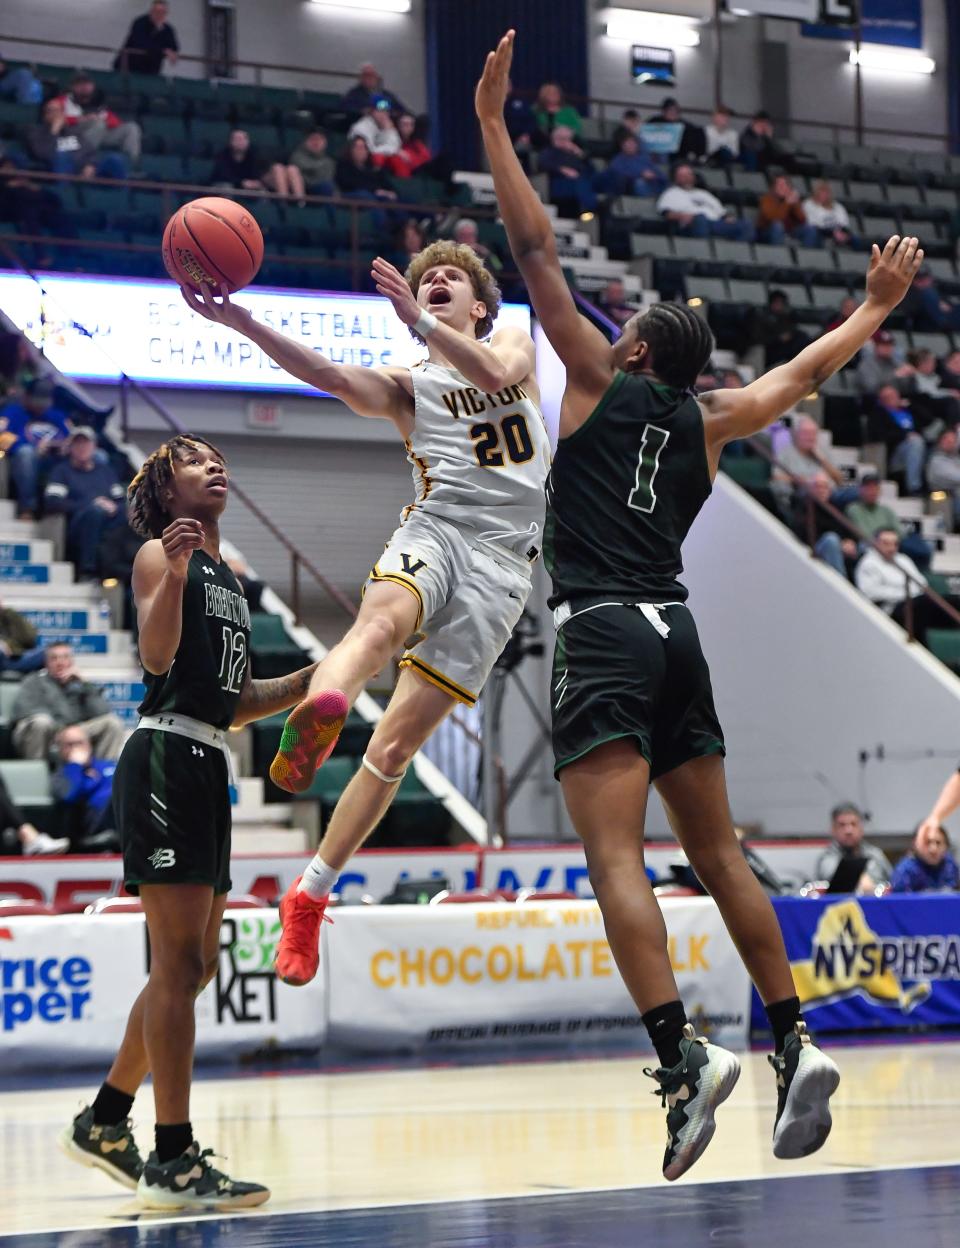 Victor's Griffen Hopkins (20) drives to the basket between Brentwood's Marquese Dennis, left, and Frederic Diogene during a NYSPHSAA Class AA Boys Basketball Championship semifinal in Glens Falls, N.Y., Friday, March 17, 2023. Victor advanced to the Class AA title game with a 56-41 win over Brentwood-XI.